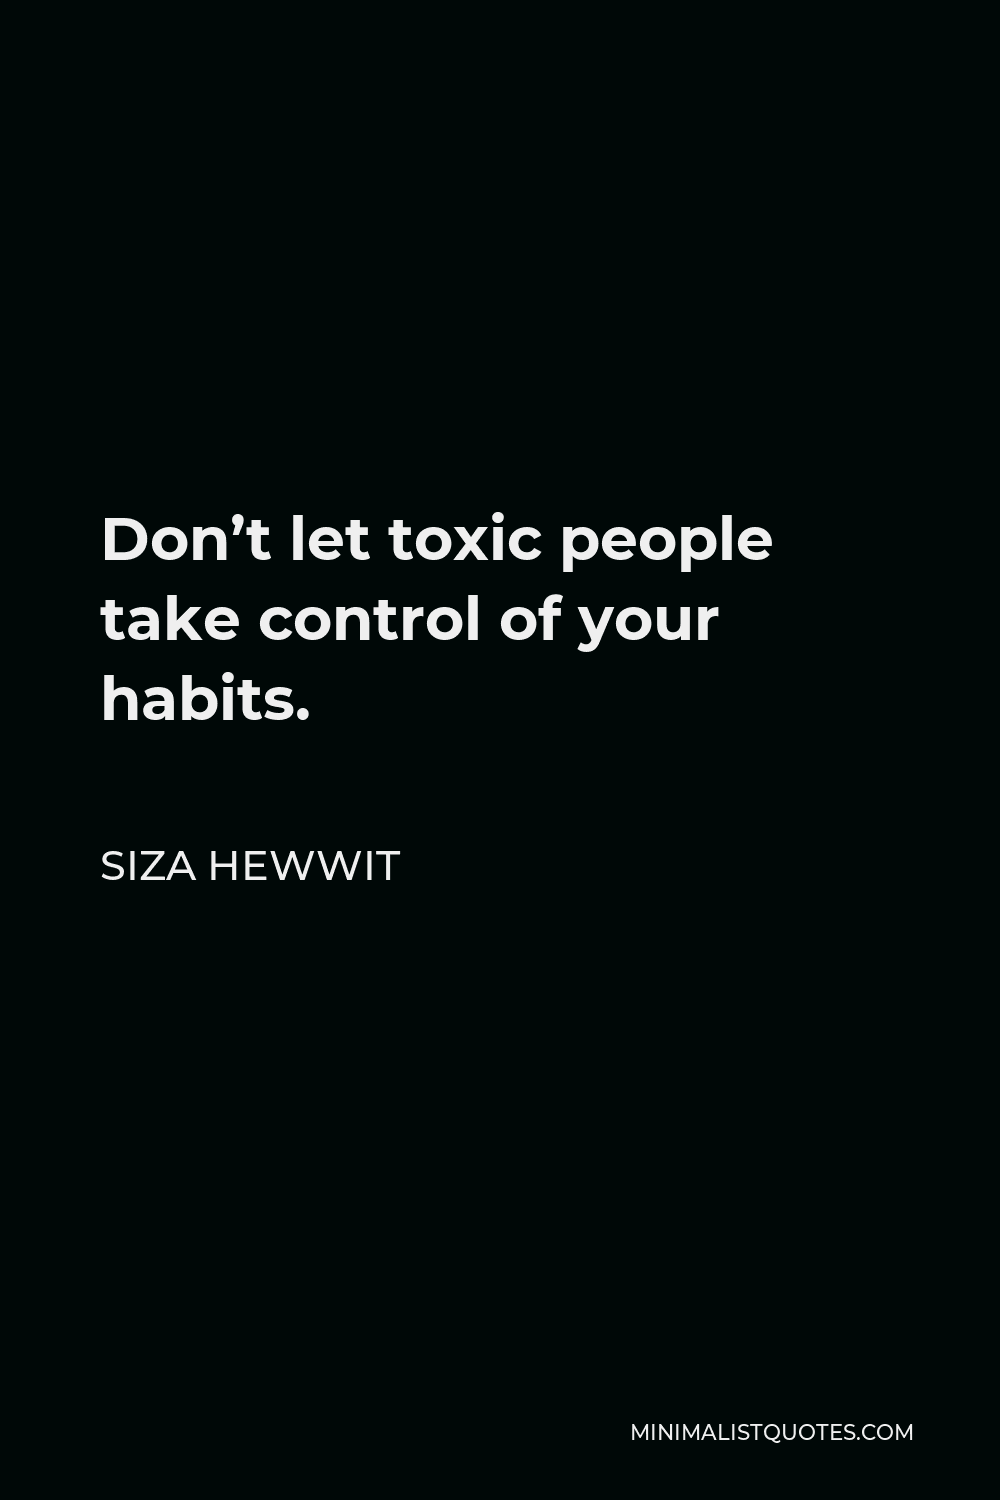 Siza Hewwit Quote - Don’t let toxic people take control of your habits.